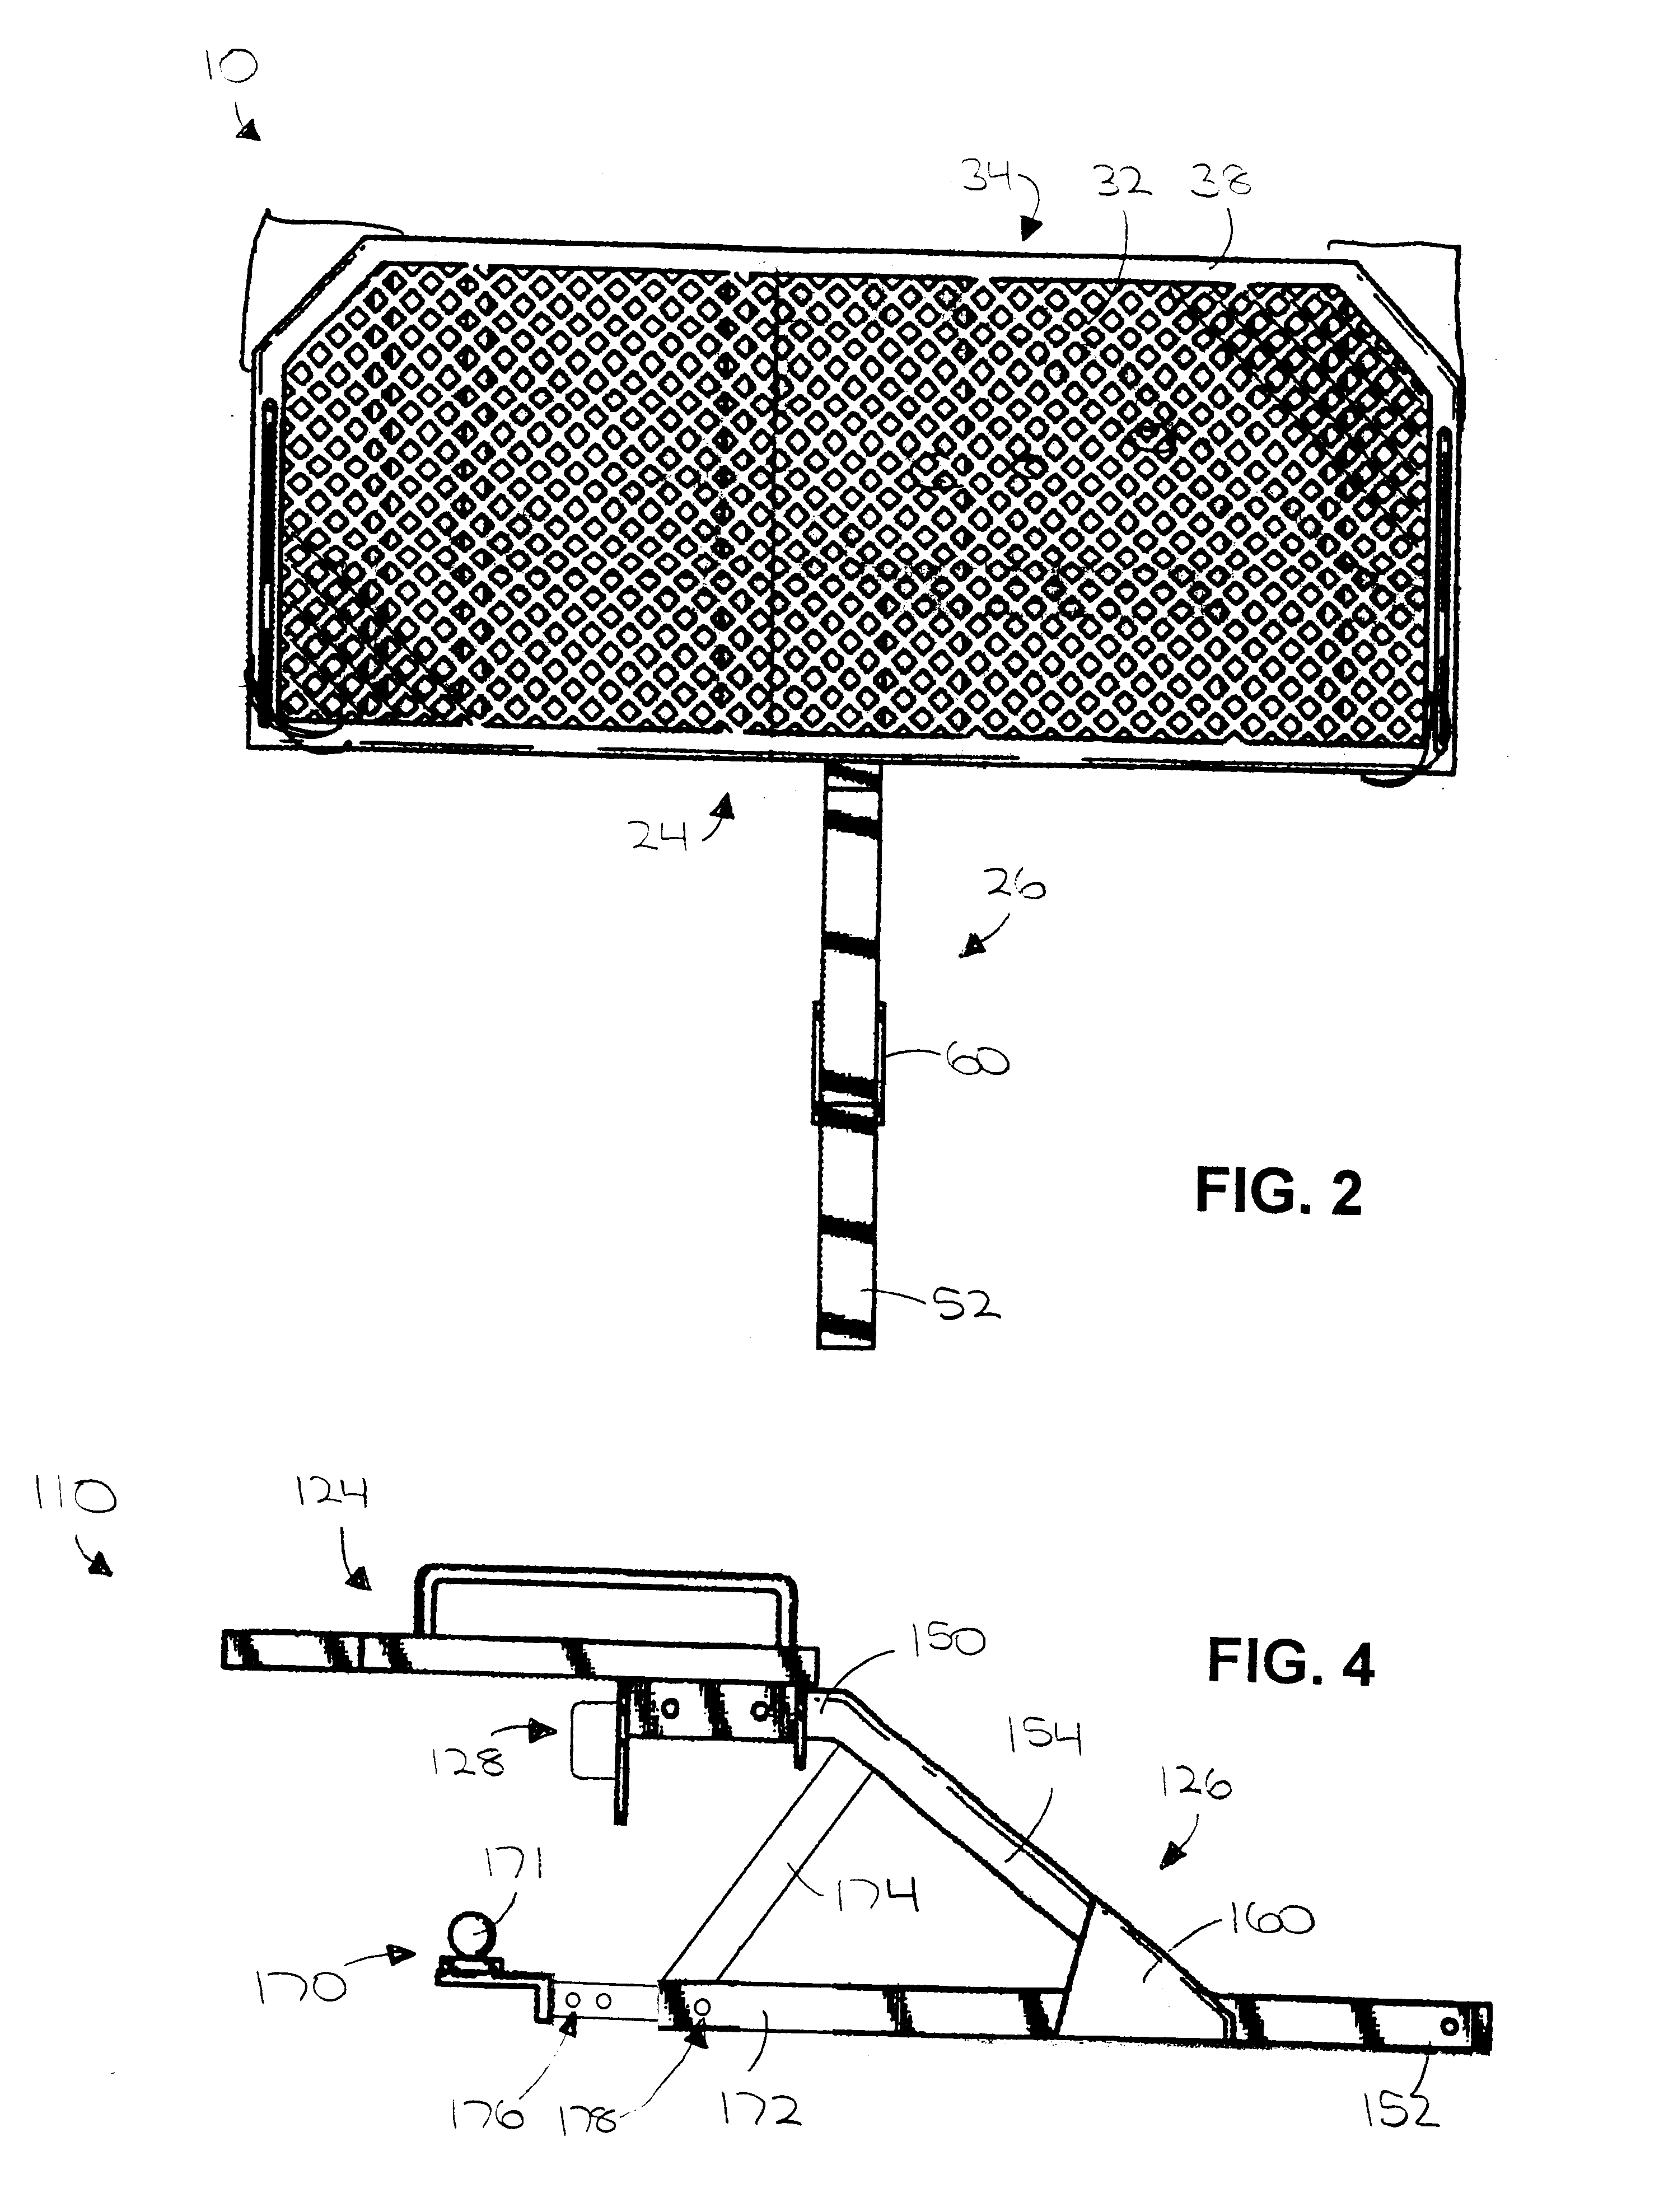 Truck bed extension device